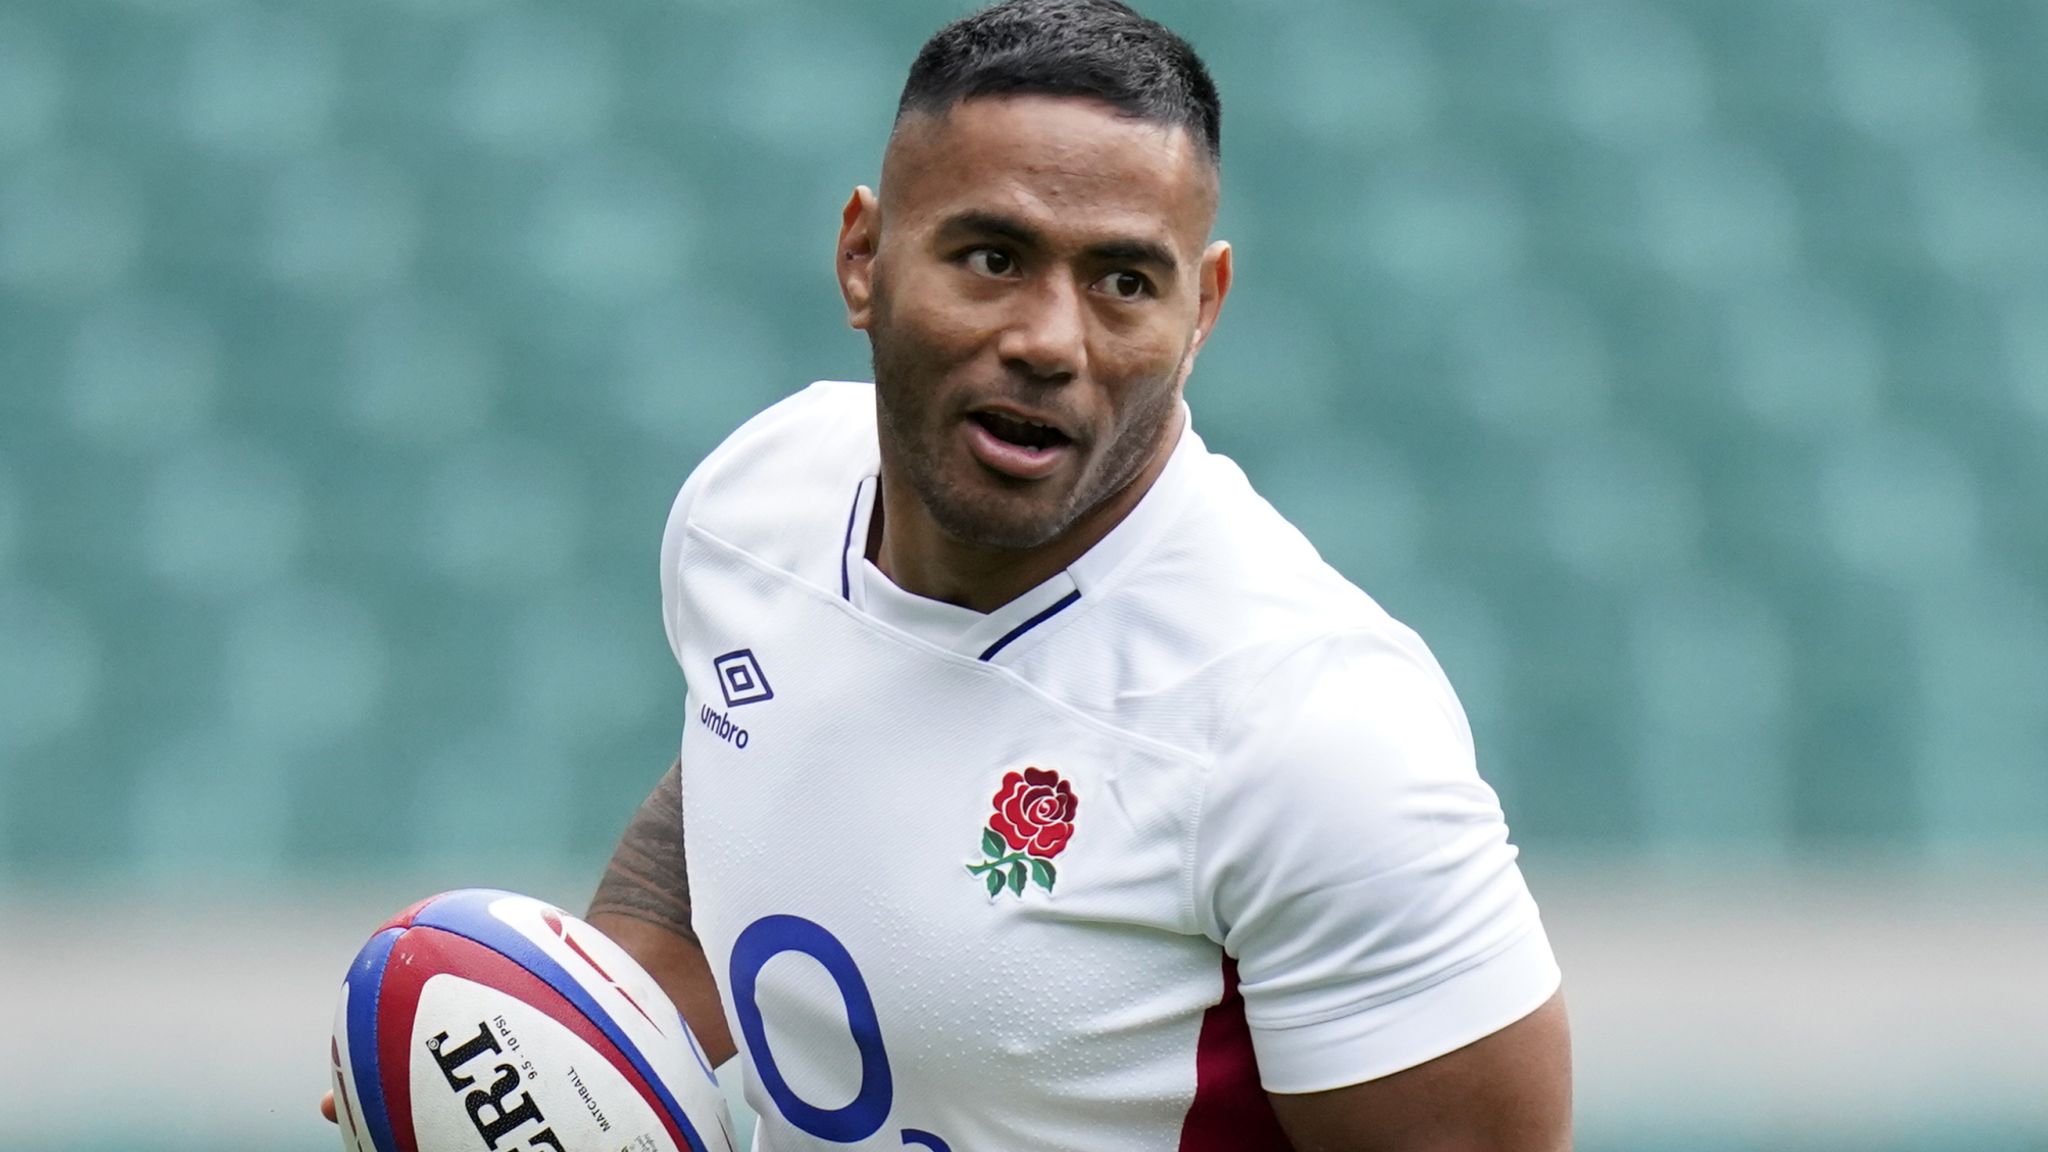 Six Nations 2022 Manu Tuilagi returns to England squad after injury ahead of Wales clash Rugby Union News Sky Sports